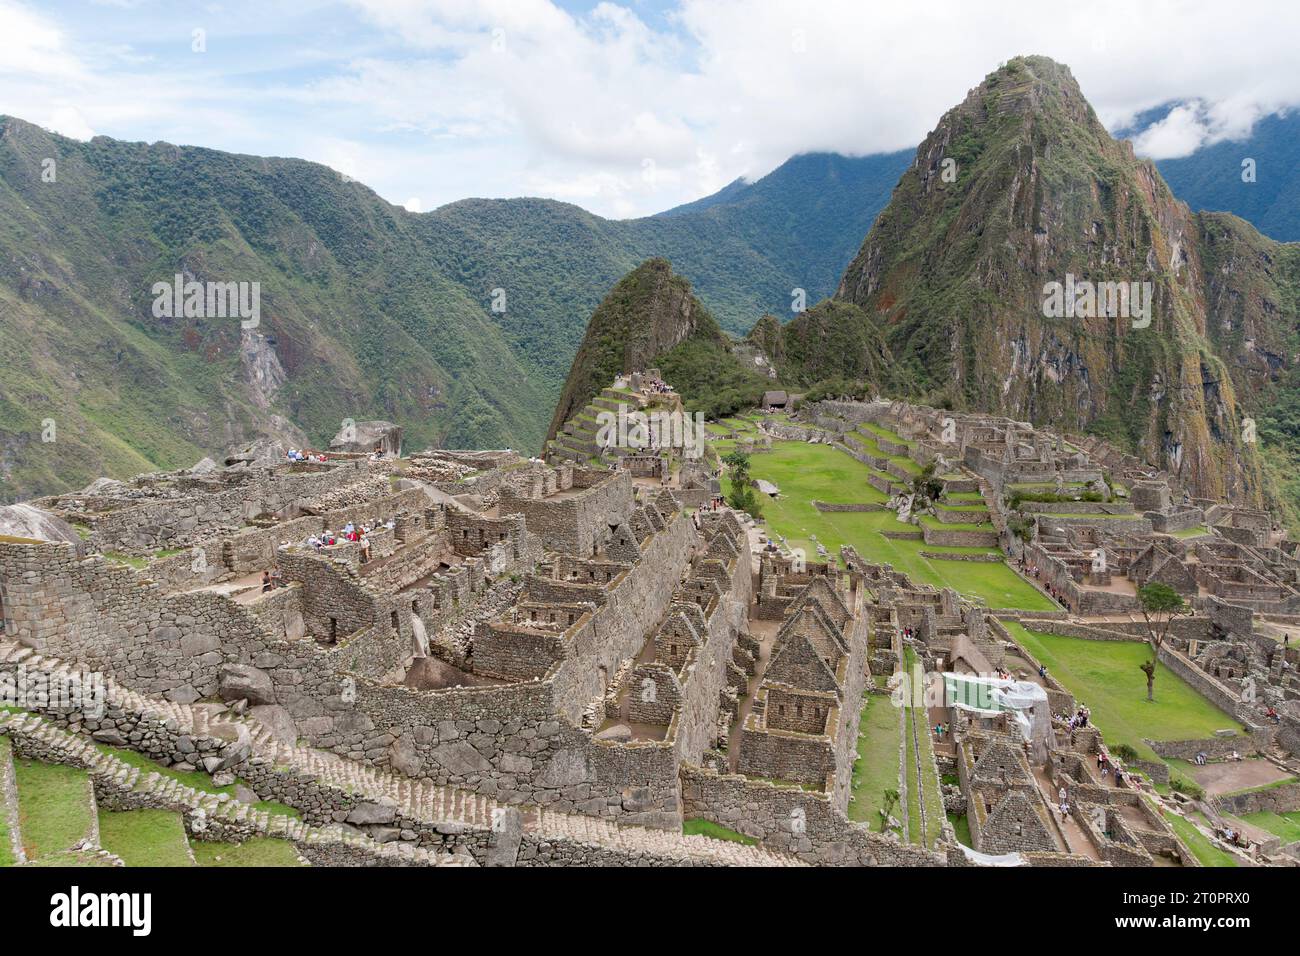 view of ruins of Machu Picchu in the Andes mountains of Peru Stock Photo